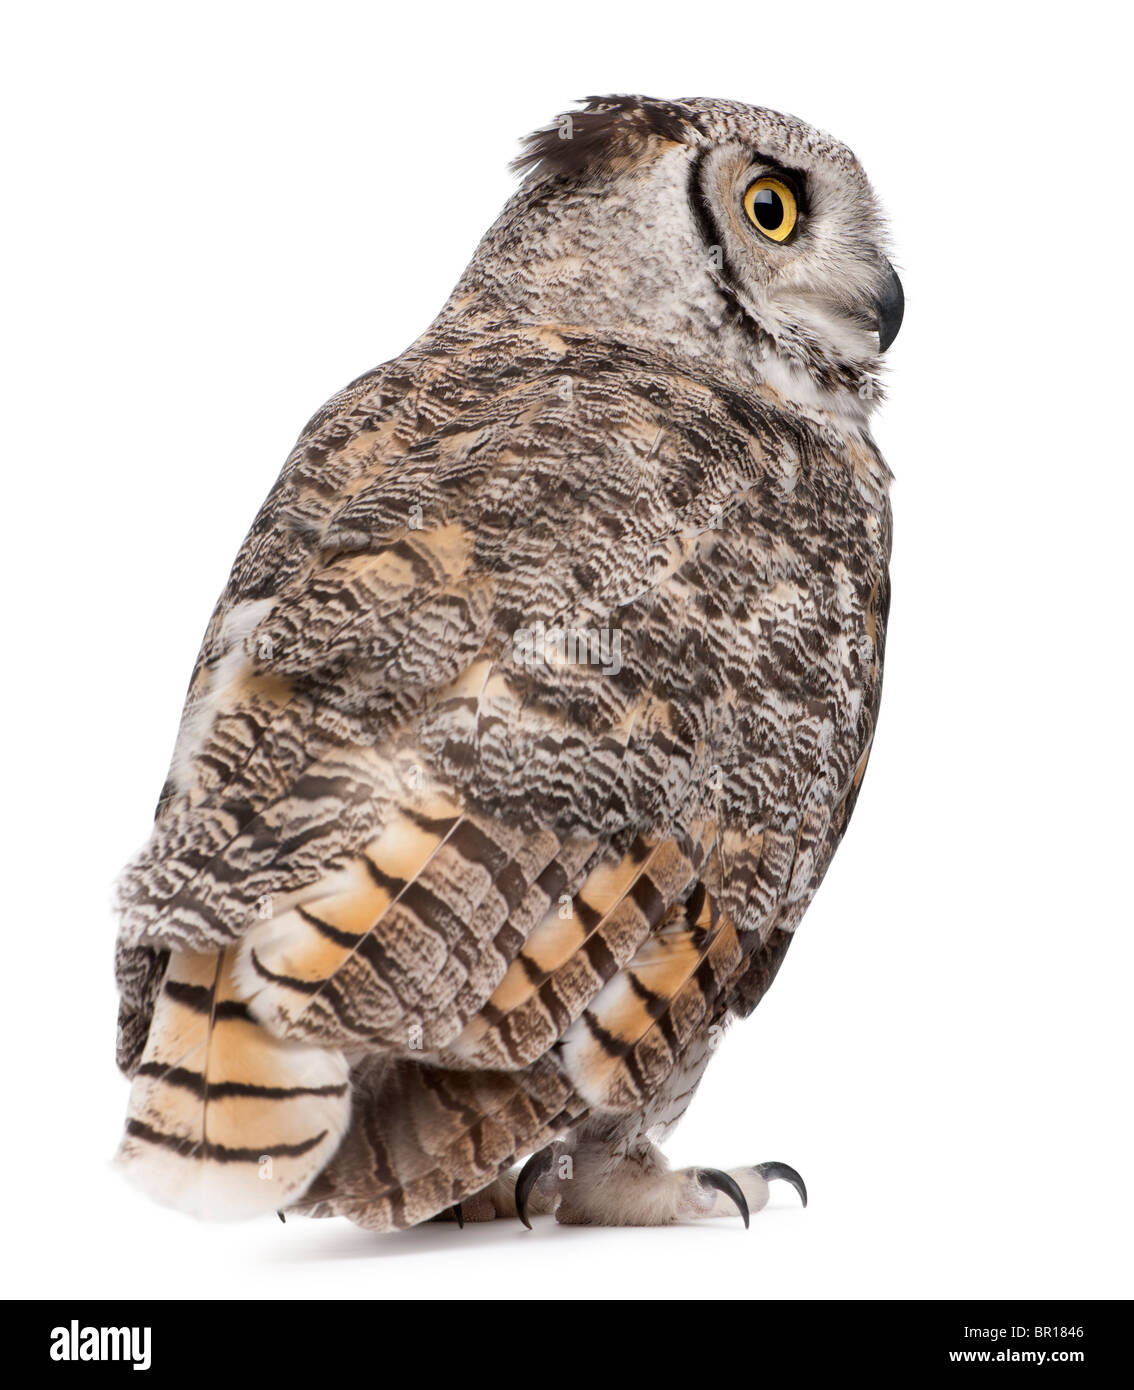 Rear view of Great Horned Owl, Bubo Virginianus Subarcticus, in front of white background Stock Photo